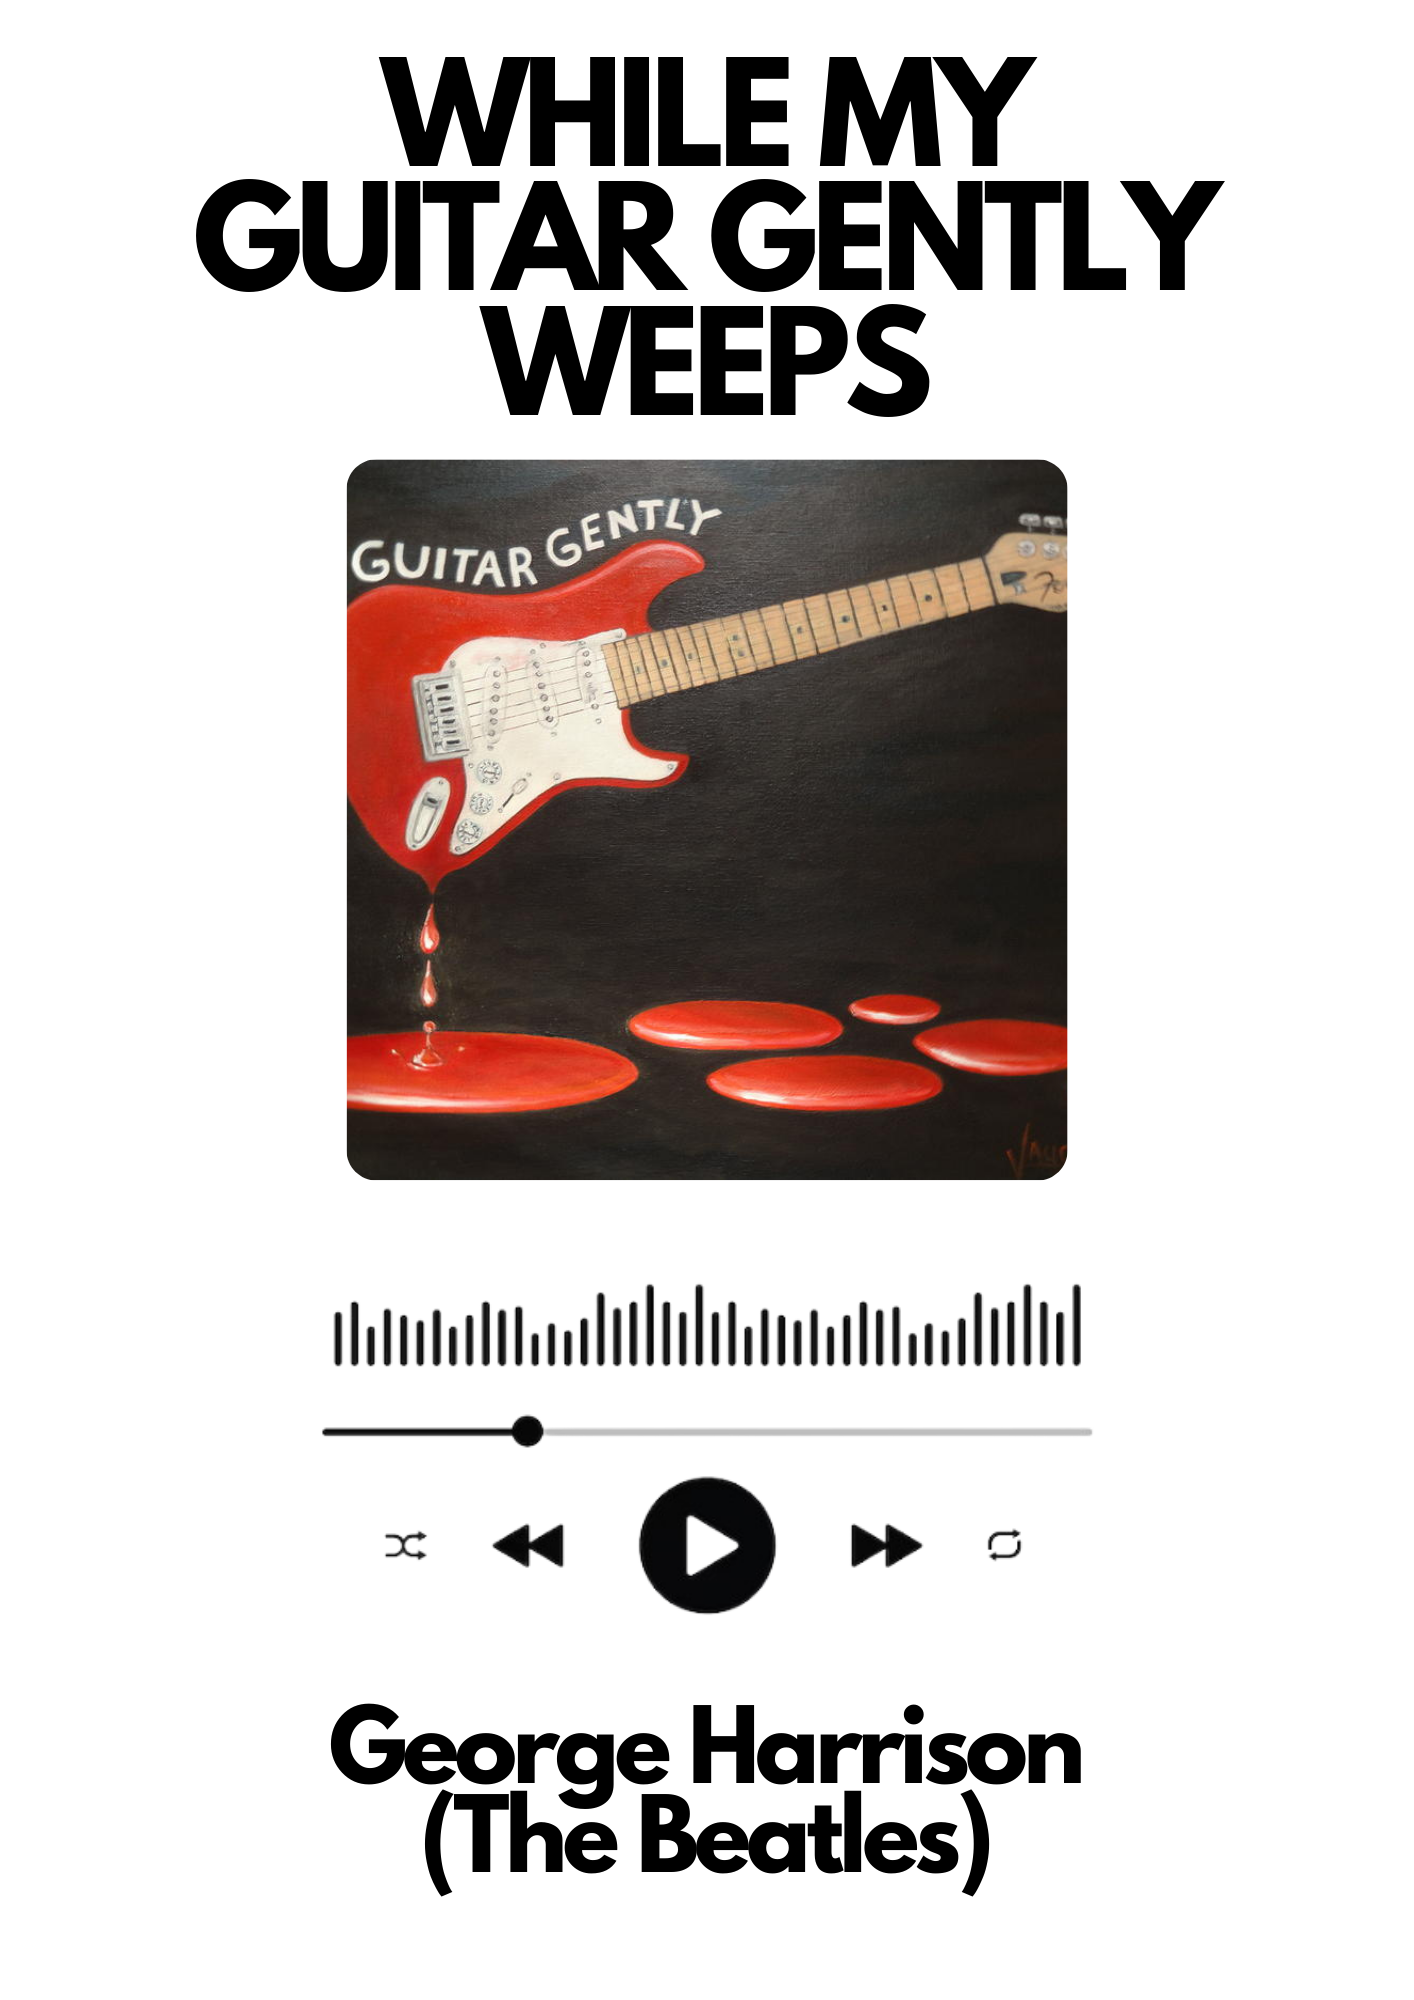 While my guitar gently weeps - The Beatles